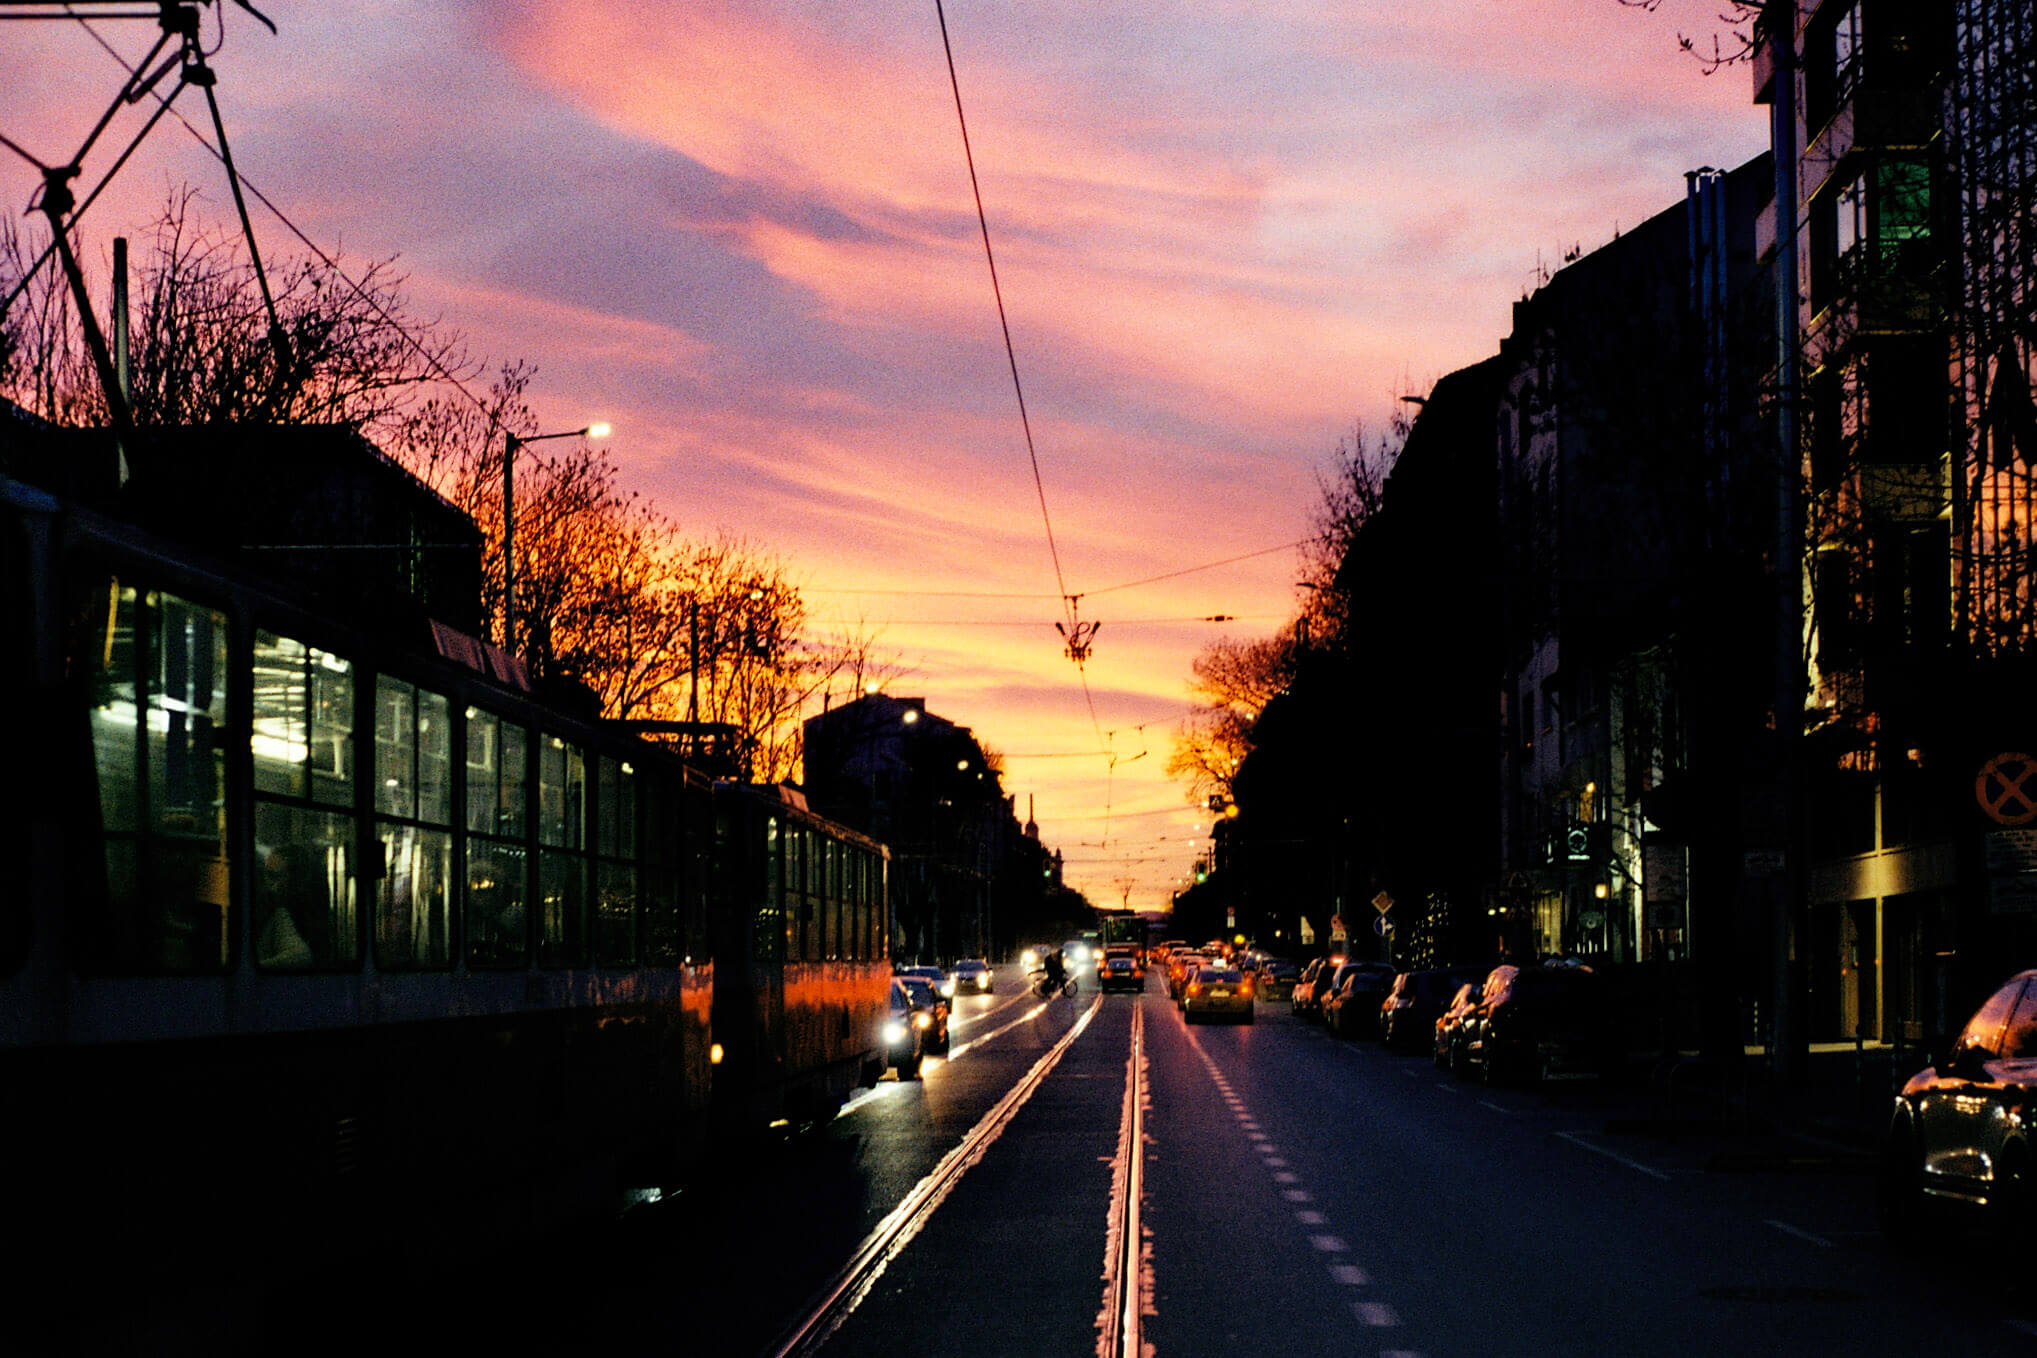 Tram lines at Sunset